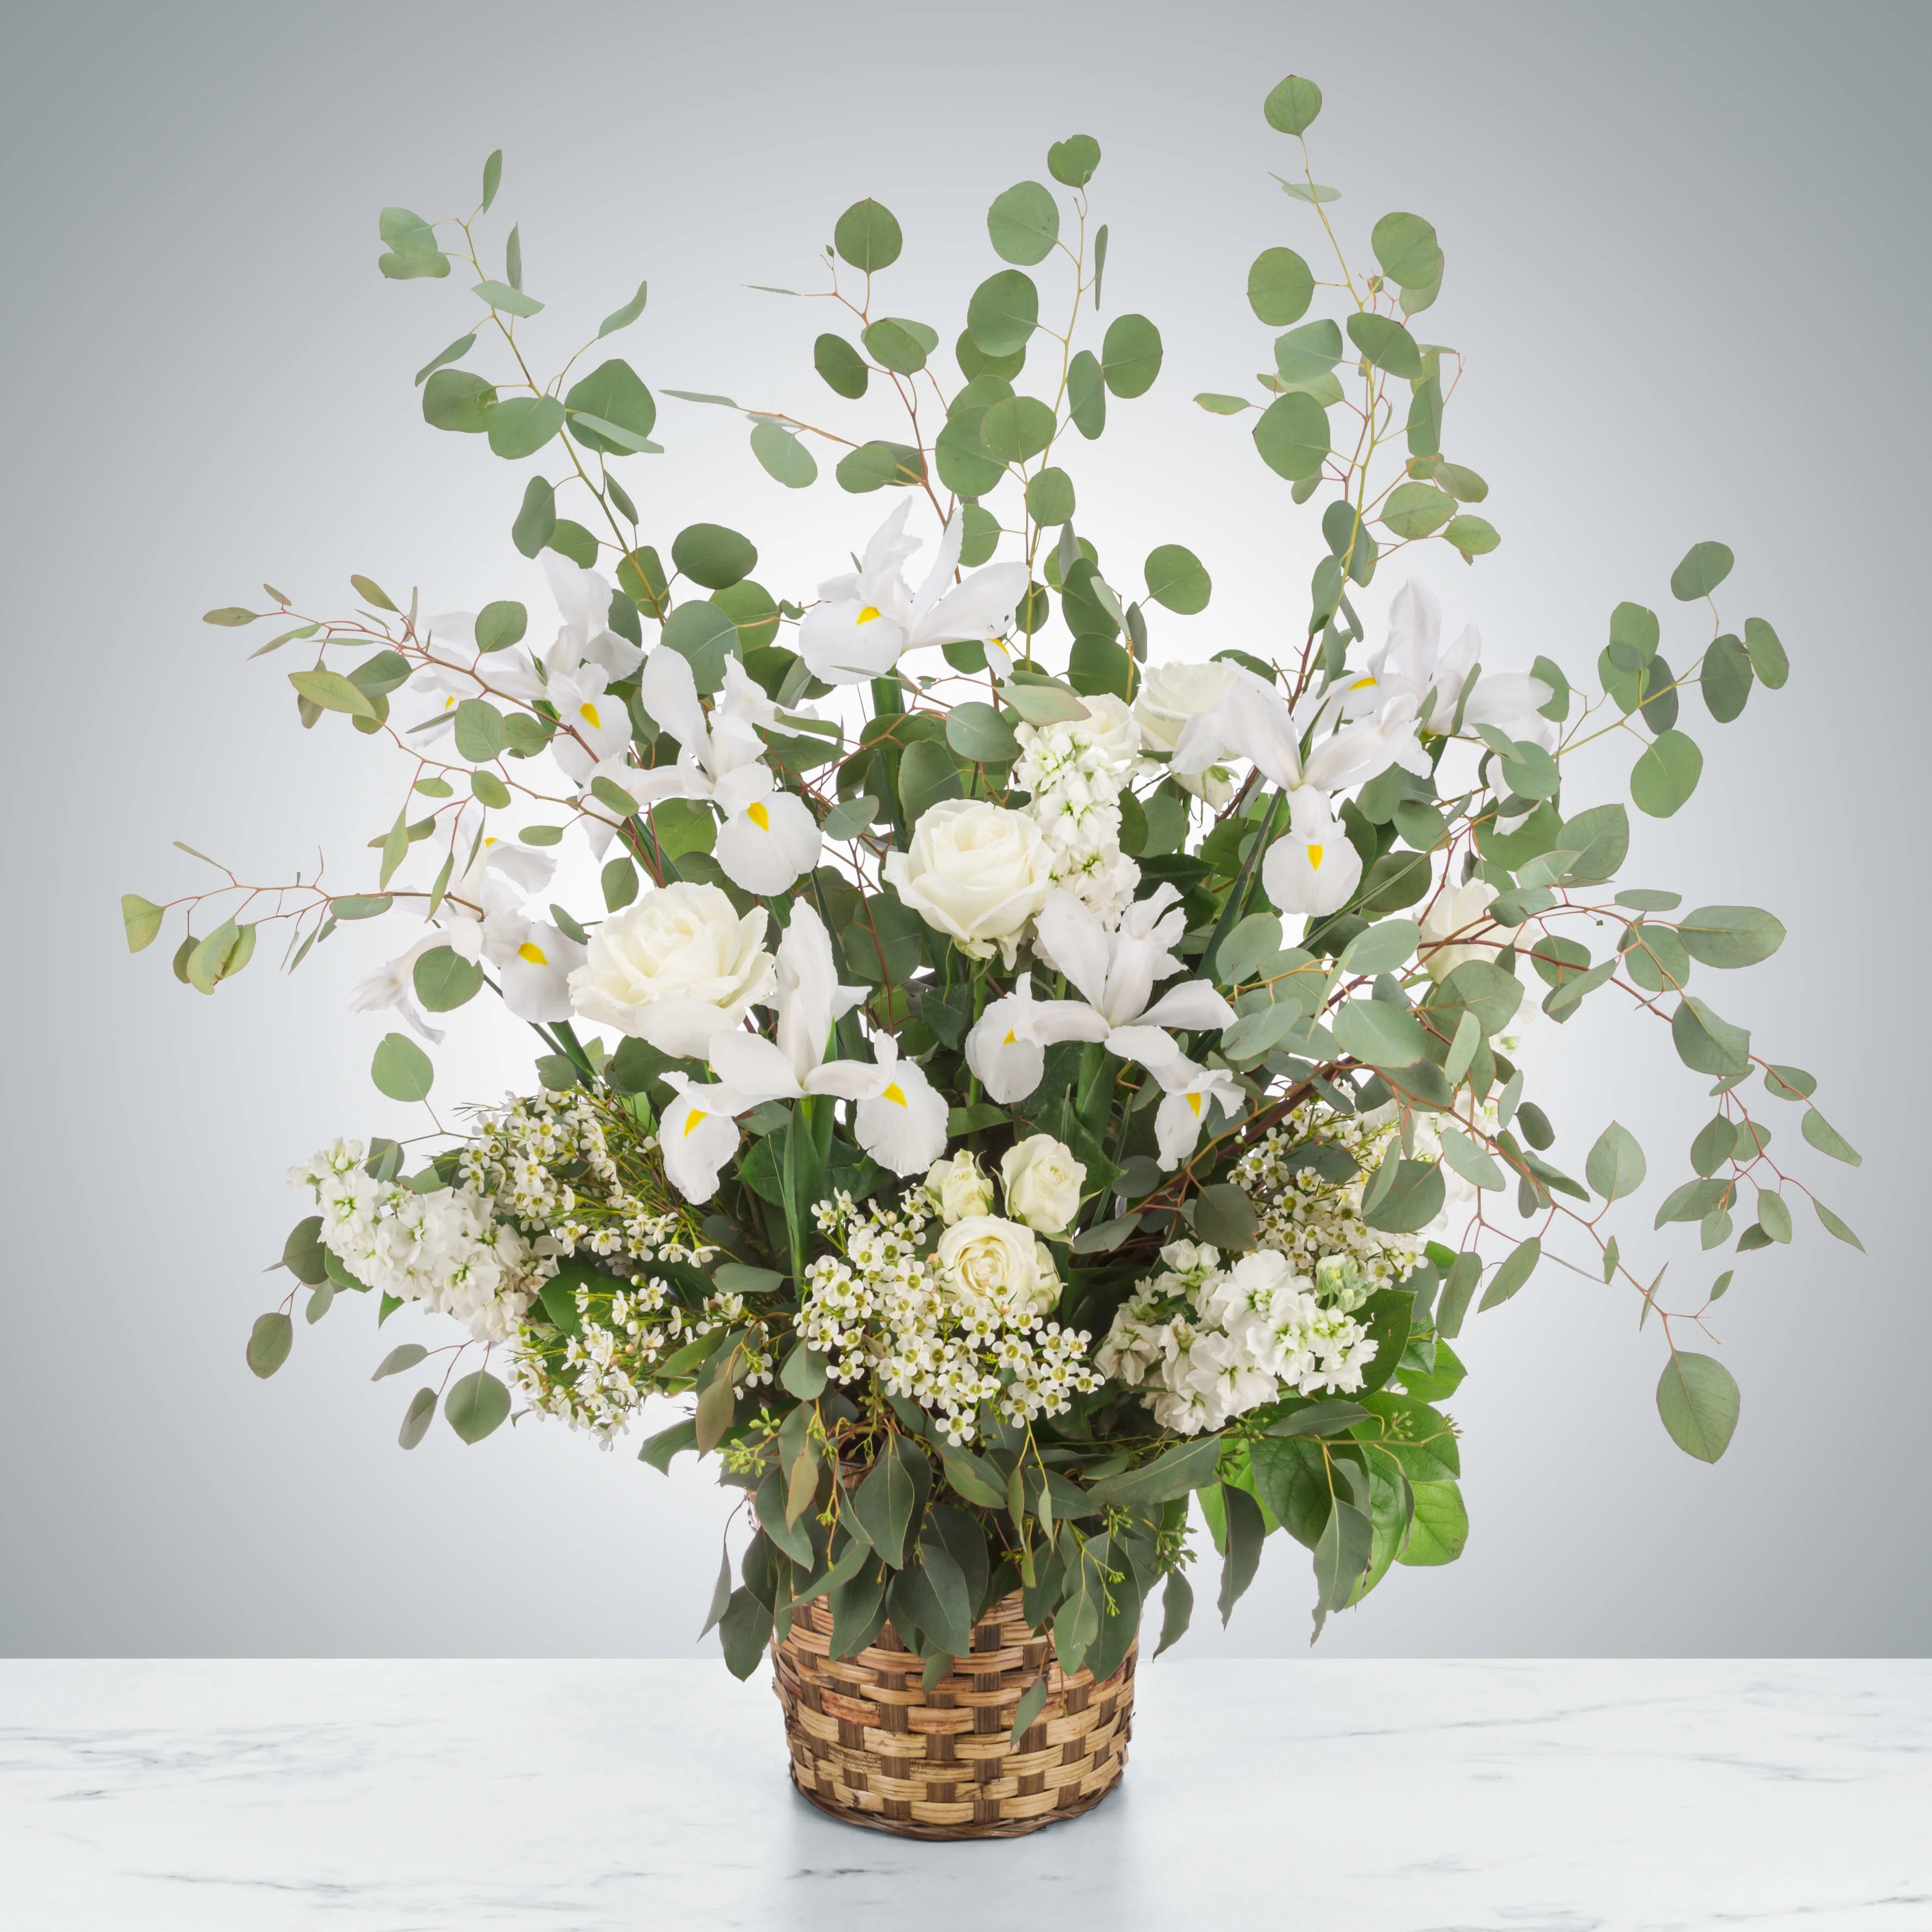 Bright Star - A wispy white and green basket featuring silver dollar eucalyptus and white iris. This arrangement smells lovely and is suitable for any type of ceremony. 